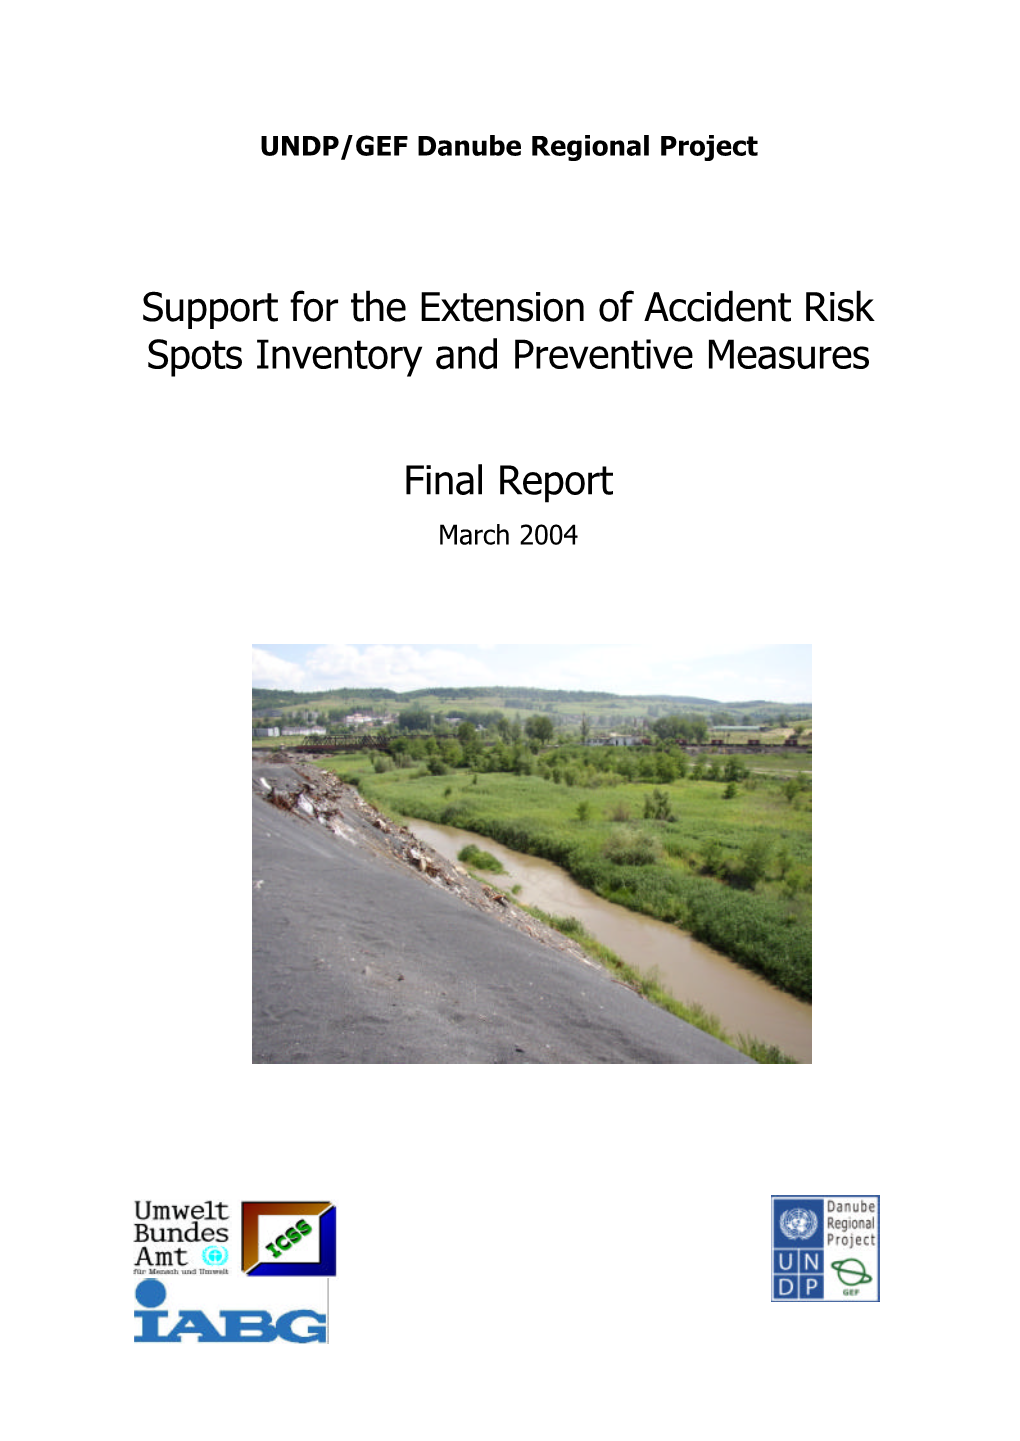 Support for the Extension of Accident Risk Spots Inventory and Preventive Measures